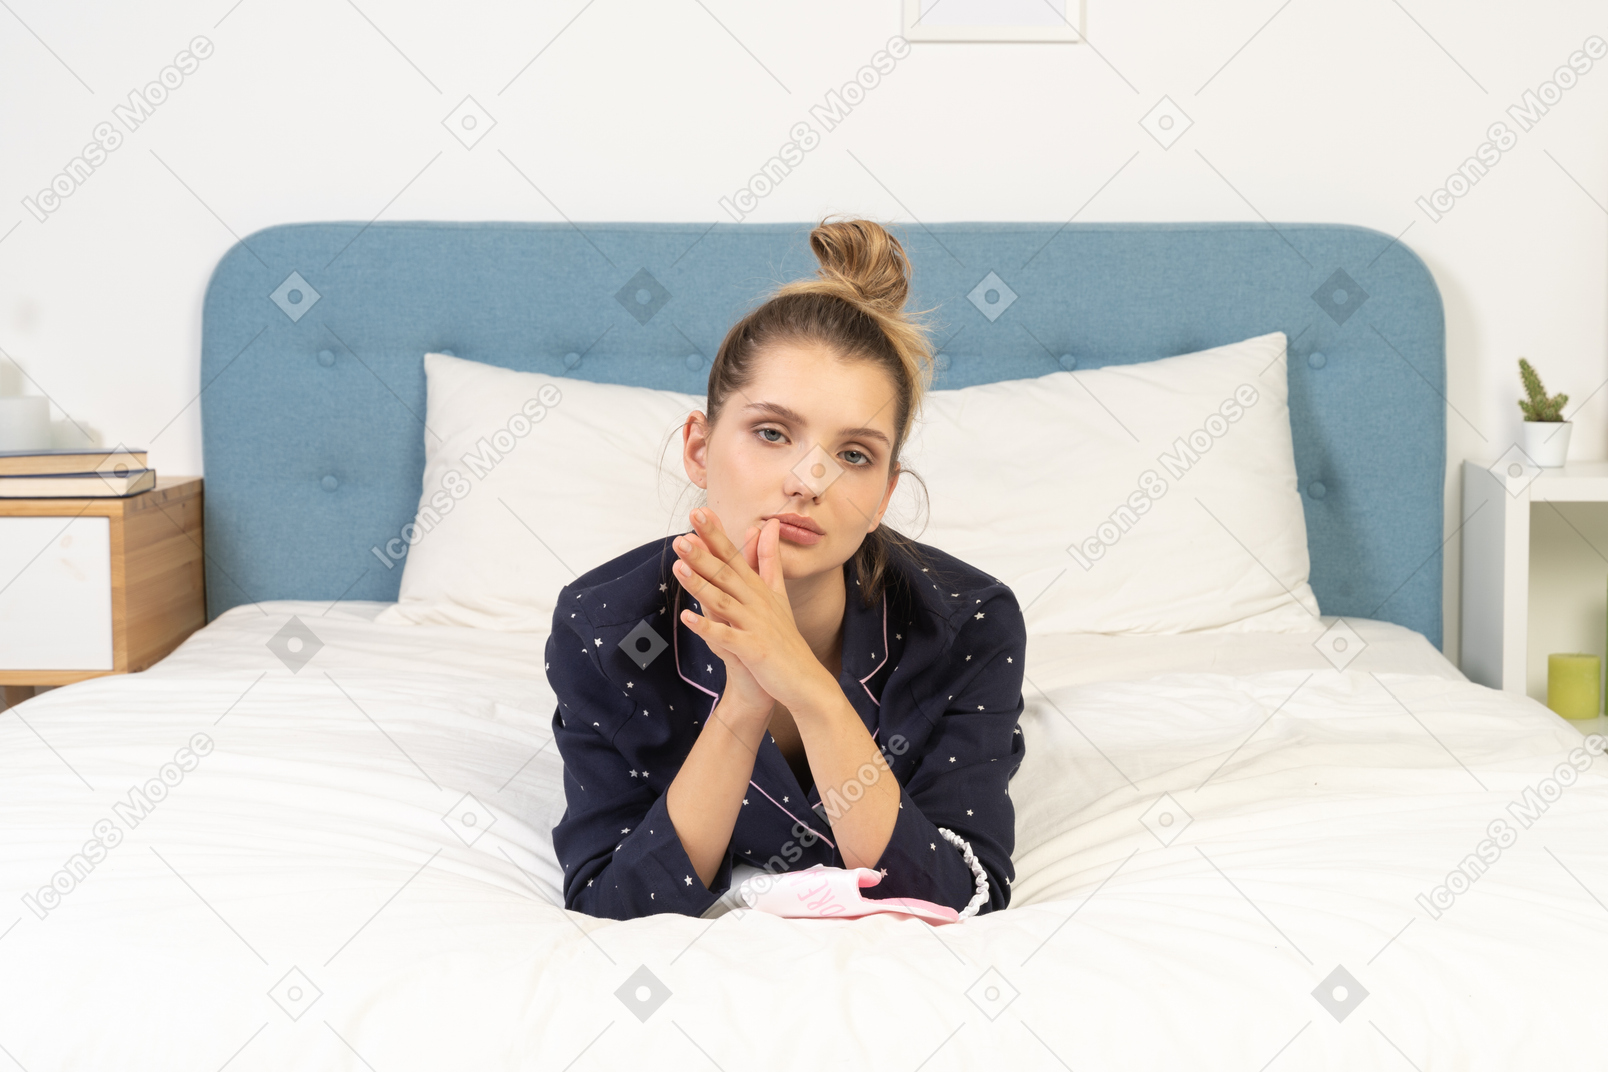 Front view of a bored young female laying in bed and holding hands together